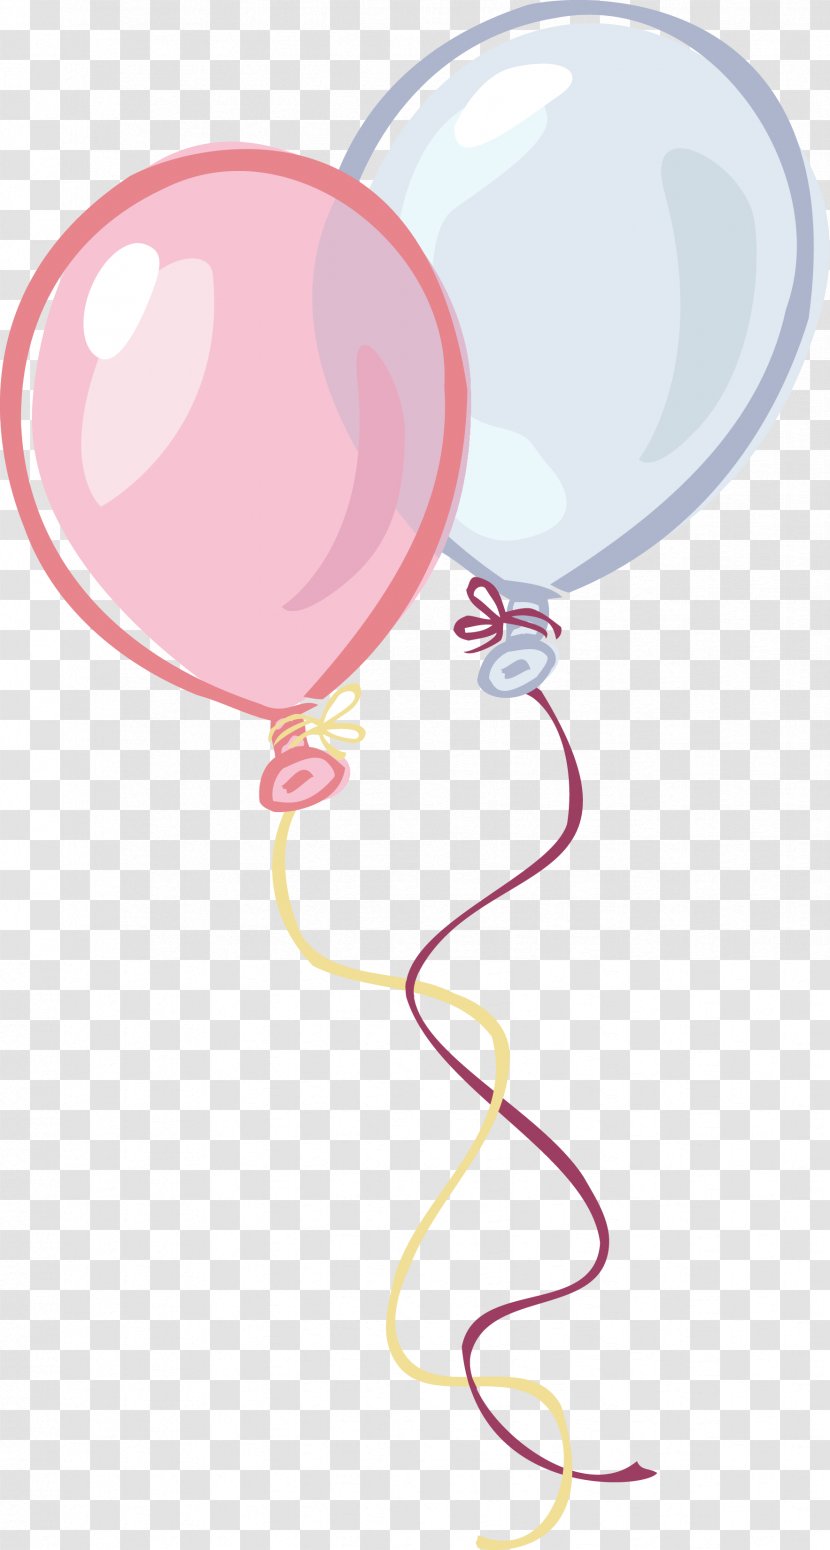 Balloon Birthday Party Clip Art - Balloons Transparent PNG